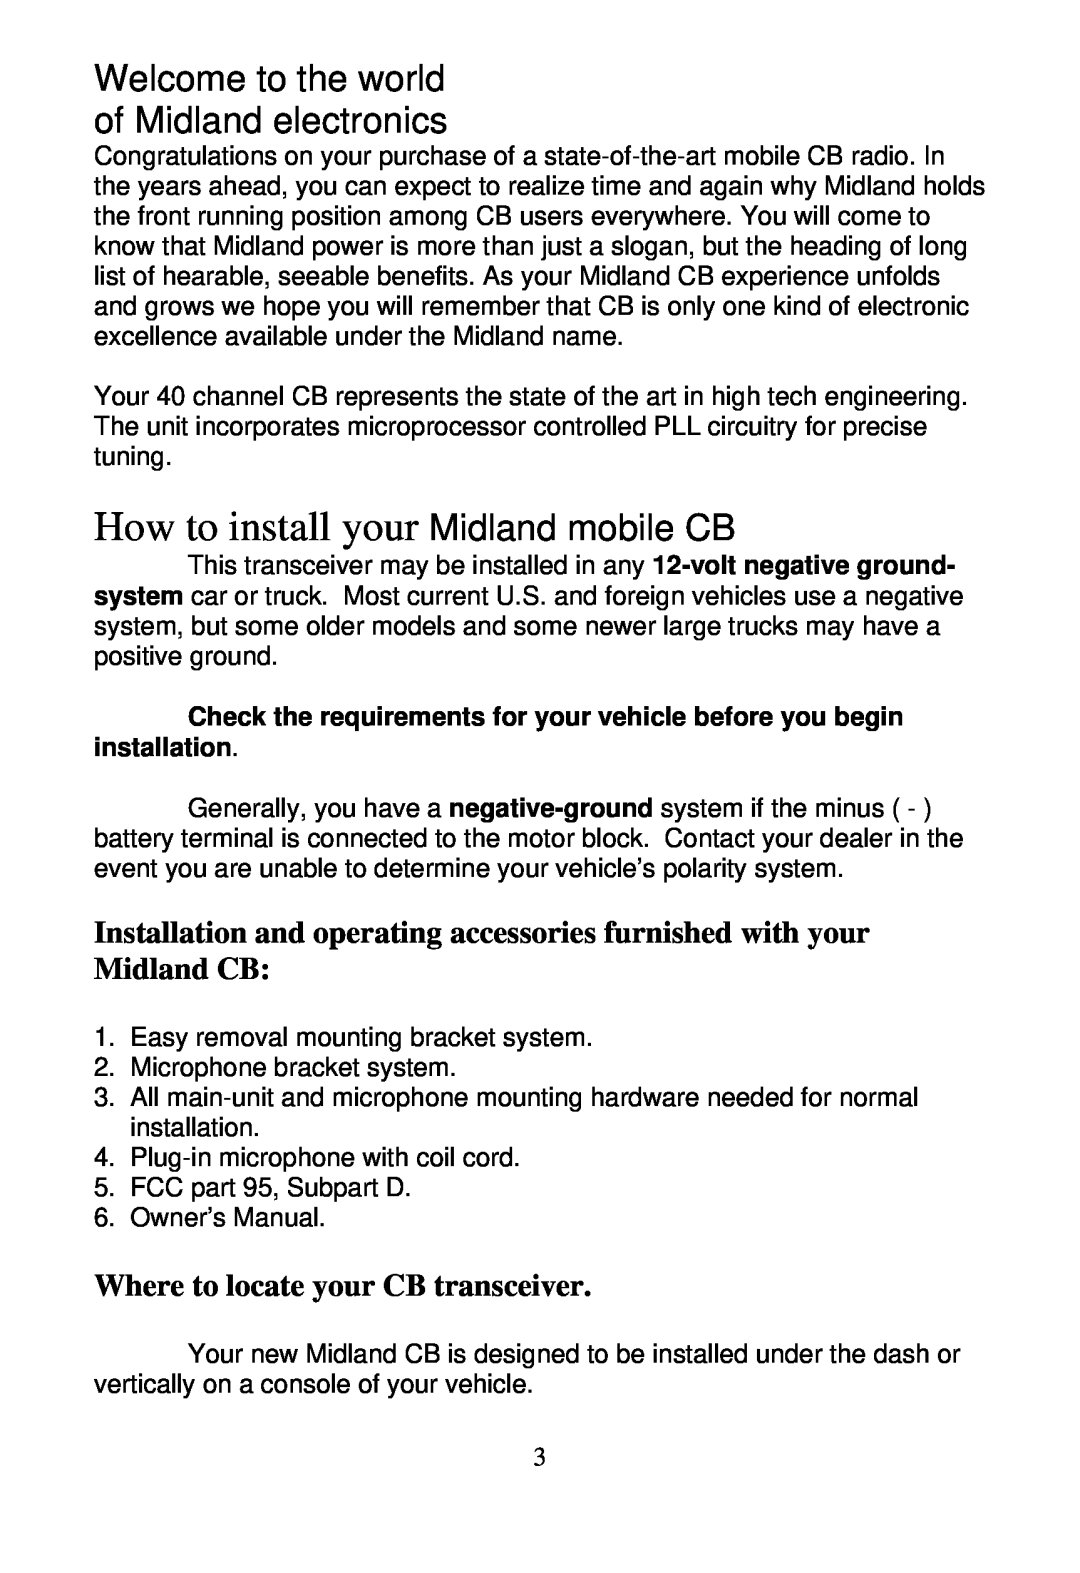 Midland Radio 1001z manual How to install your Midland mobile CB, Welcome to the world of Midland electronics 